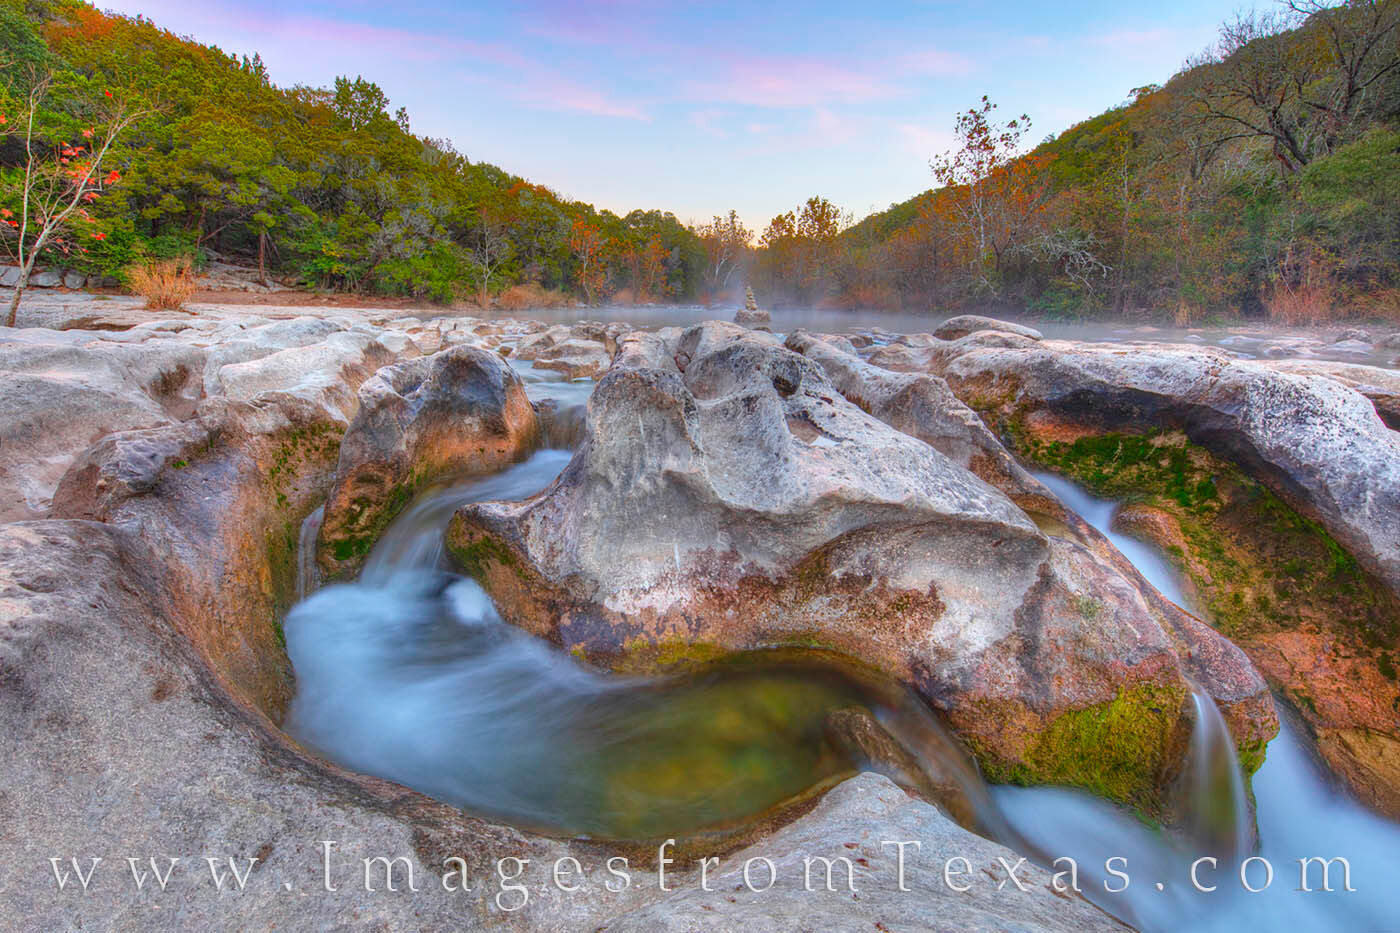 Sculpture Falls is one of the gems of the Austin greenbelt system. The walk to this location is about 1.6 miles each way from...